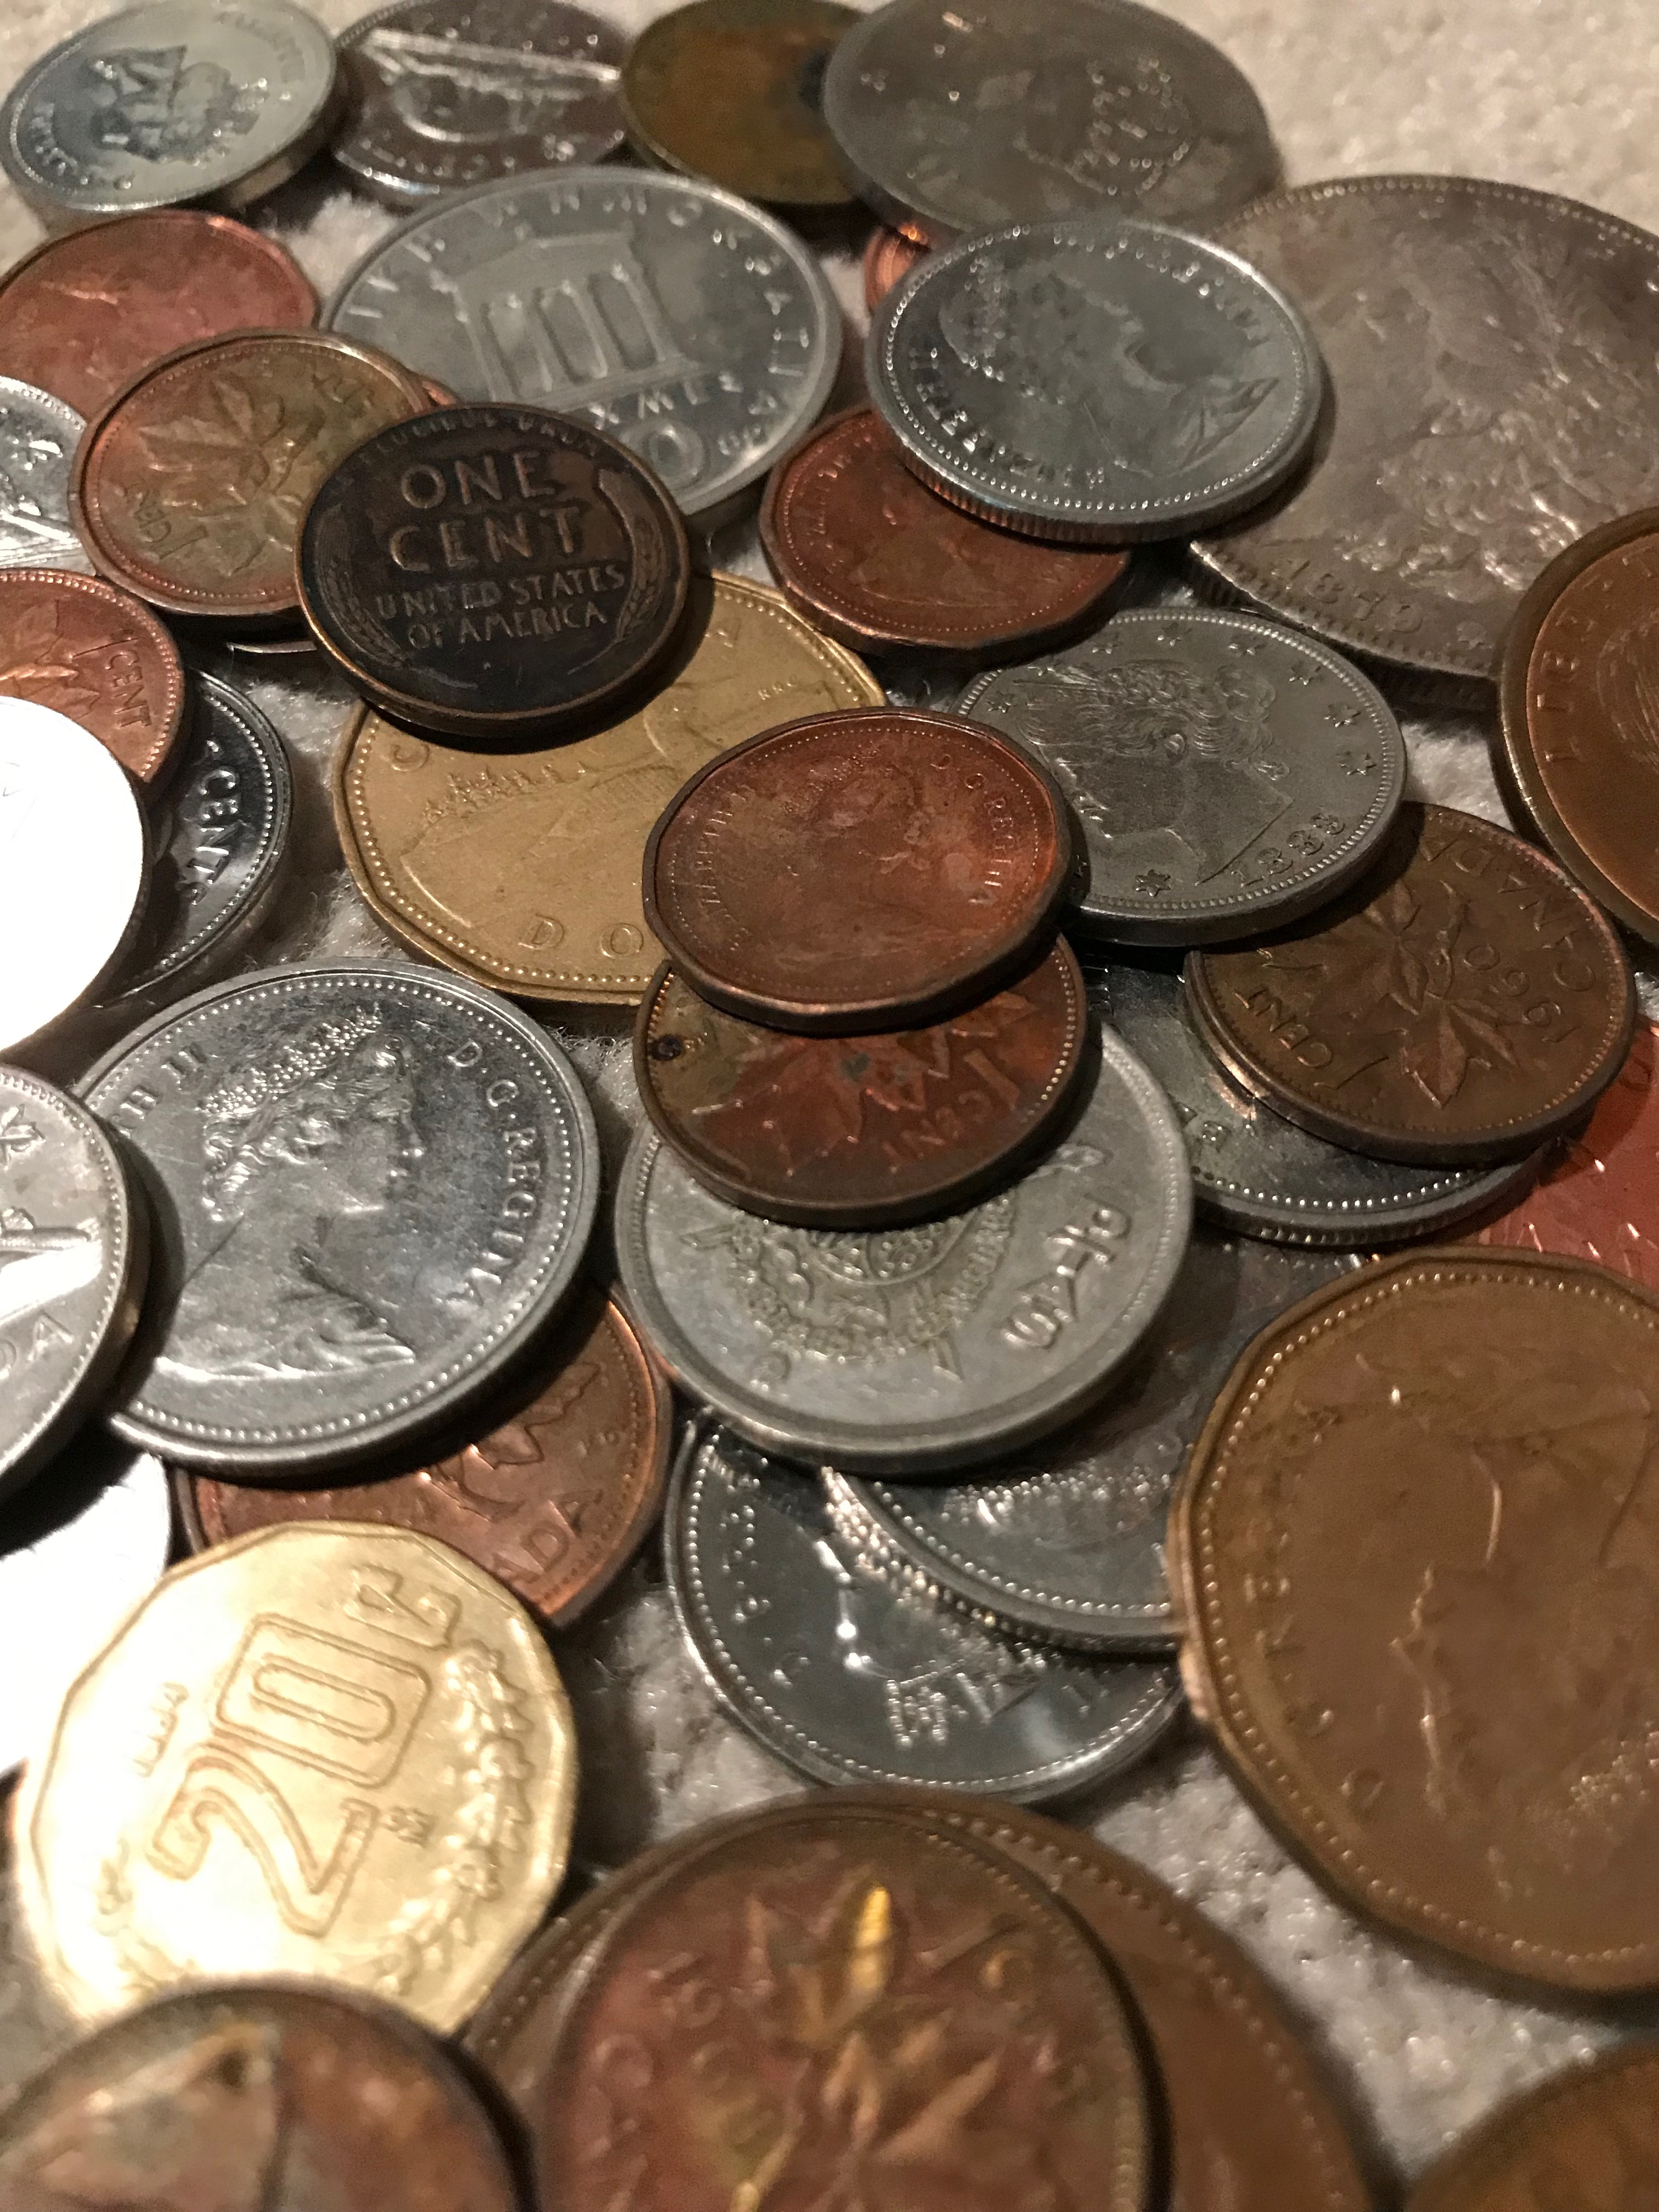 A pile of coins from different countries